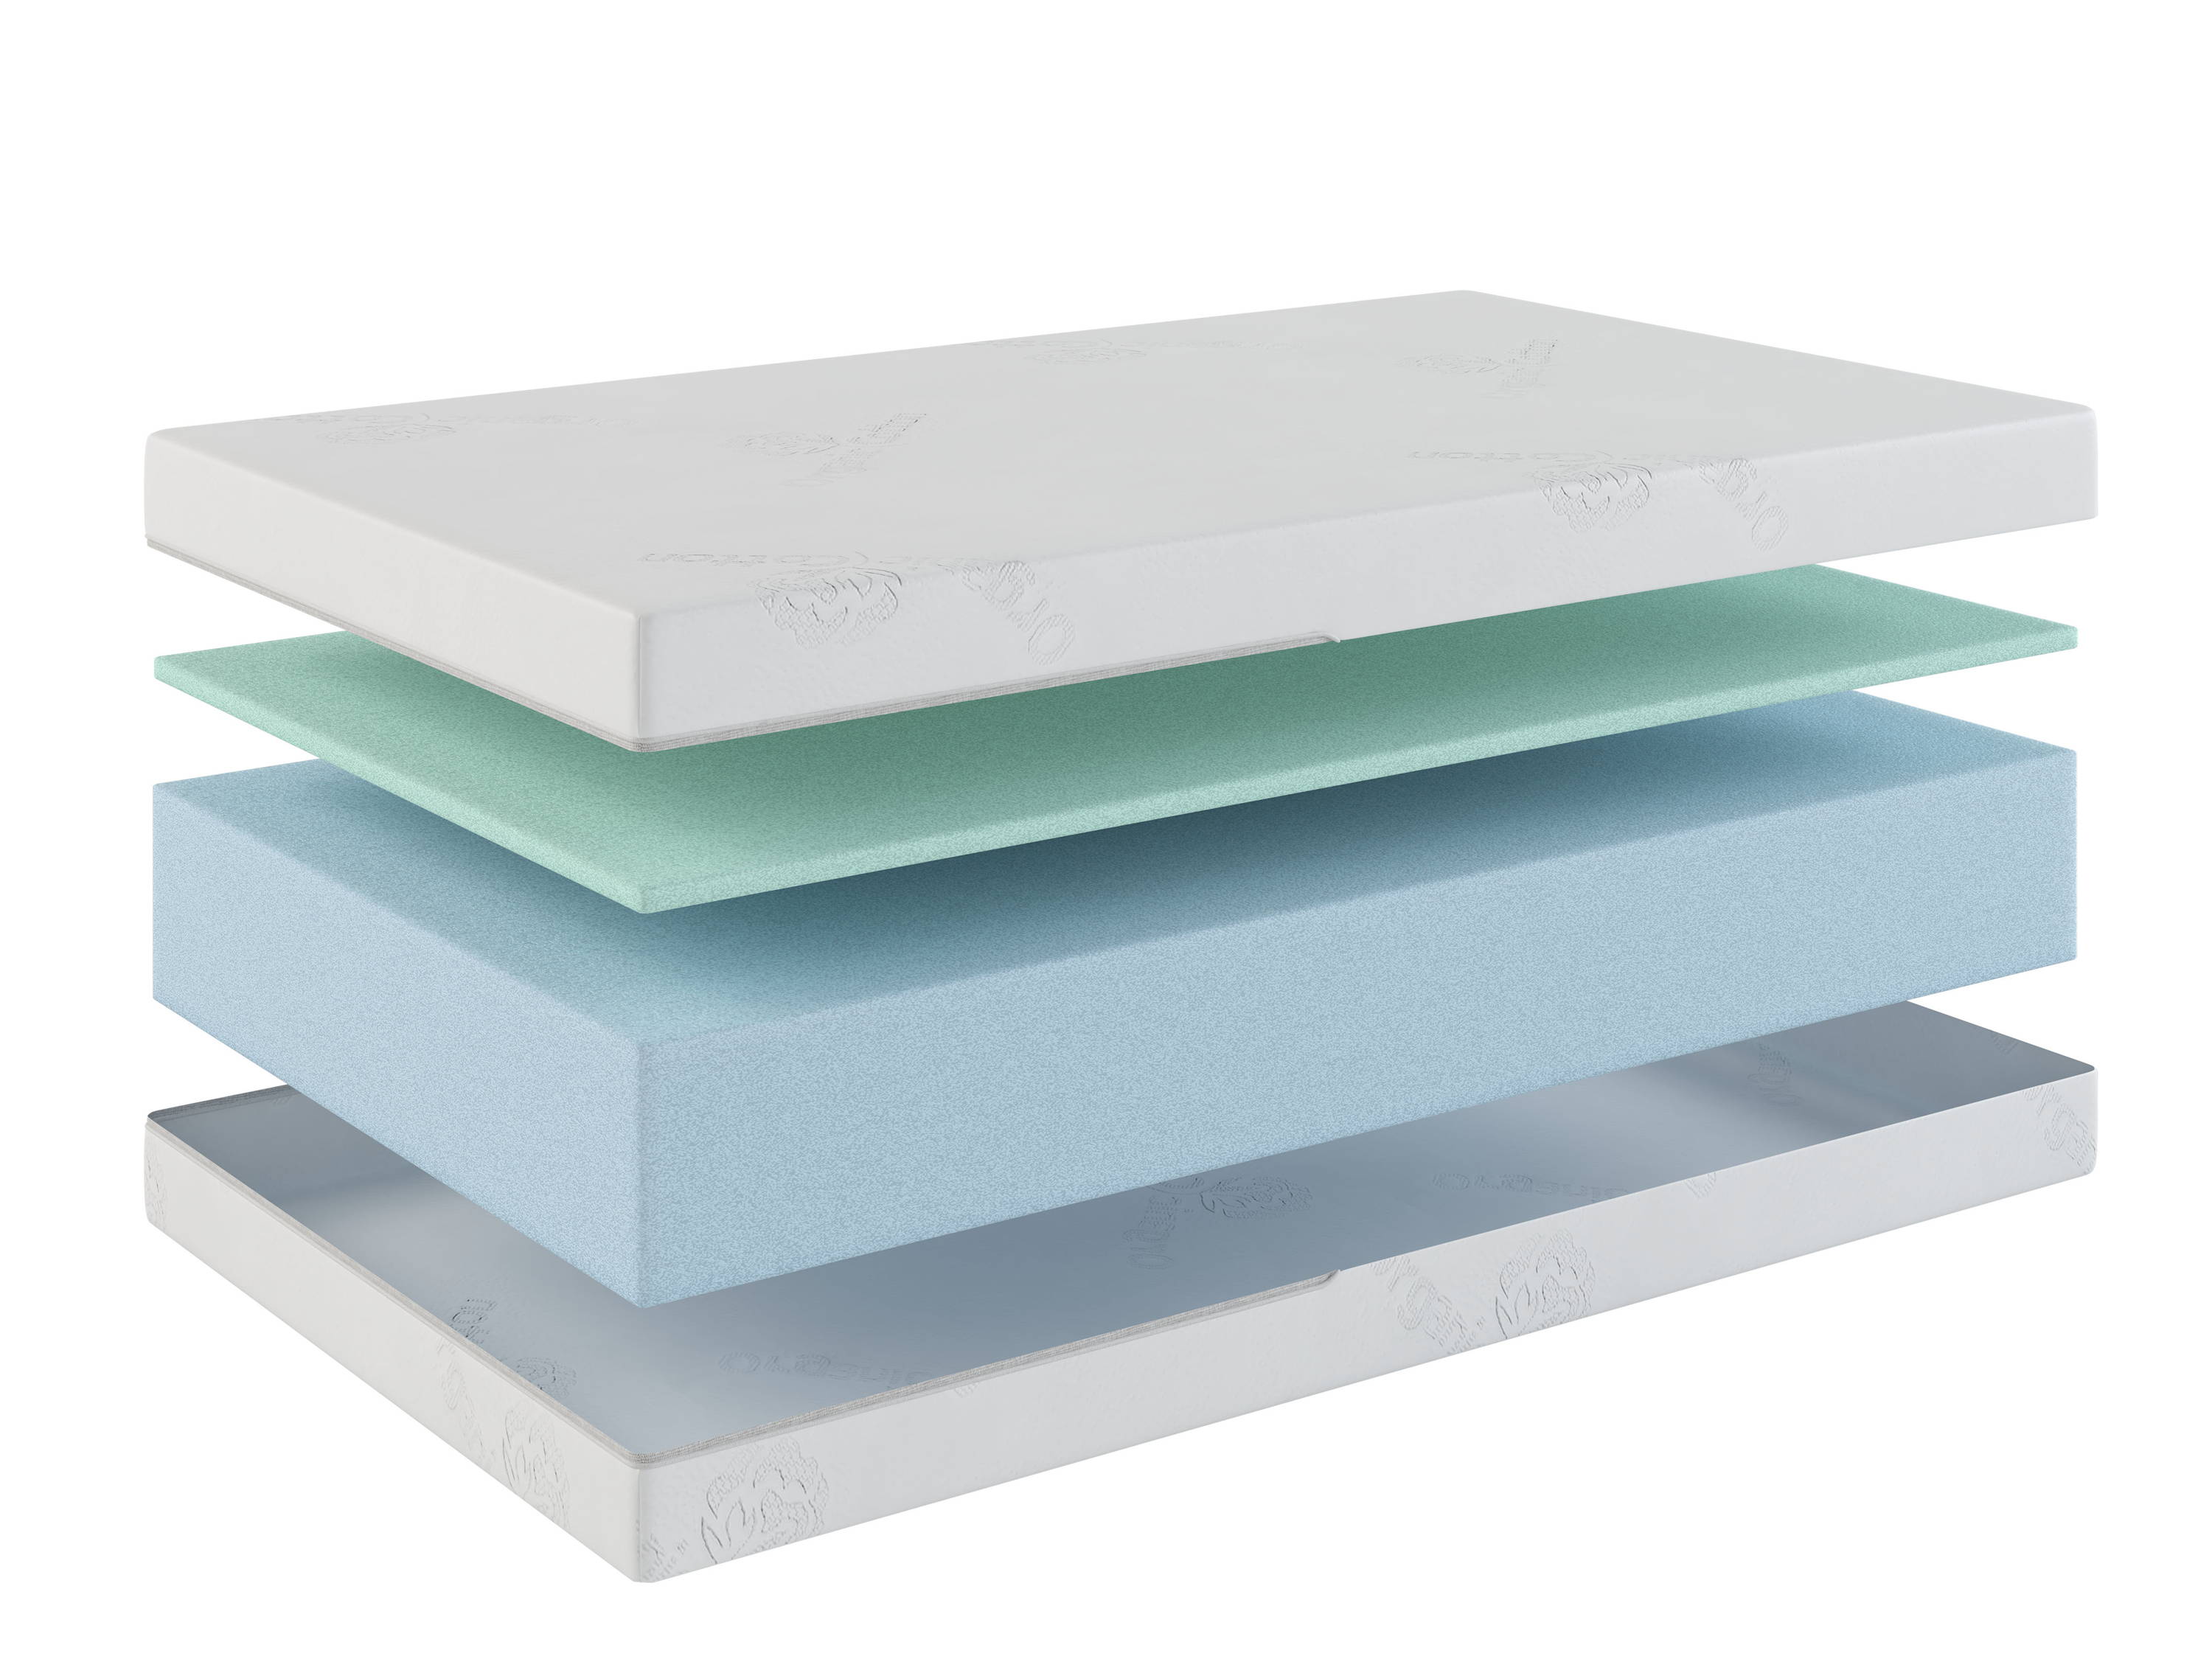 Two-Stage Organic Traditions breathable crib mattress layer showing two internal layers.